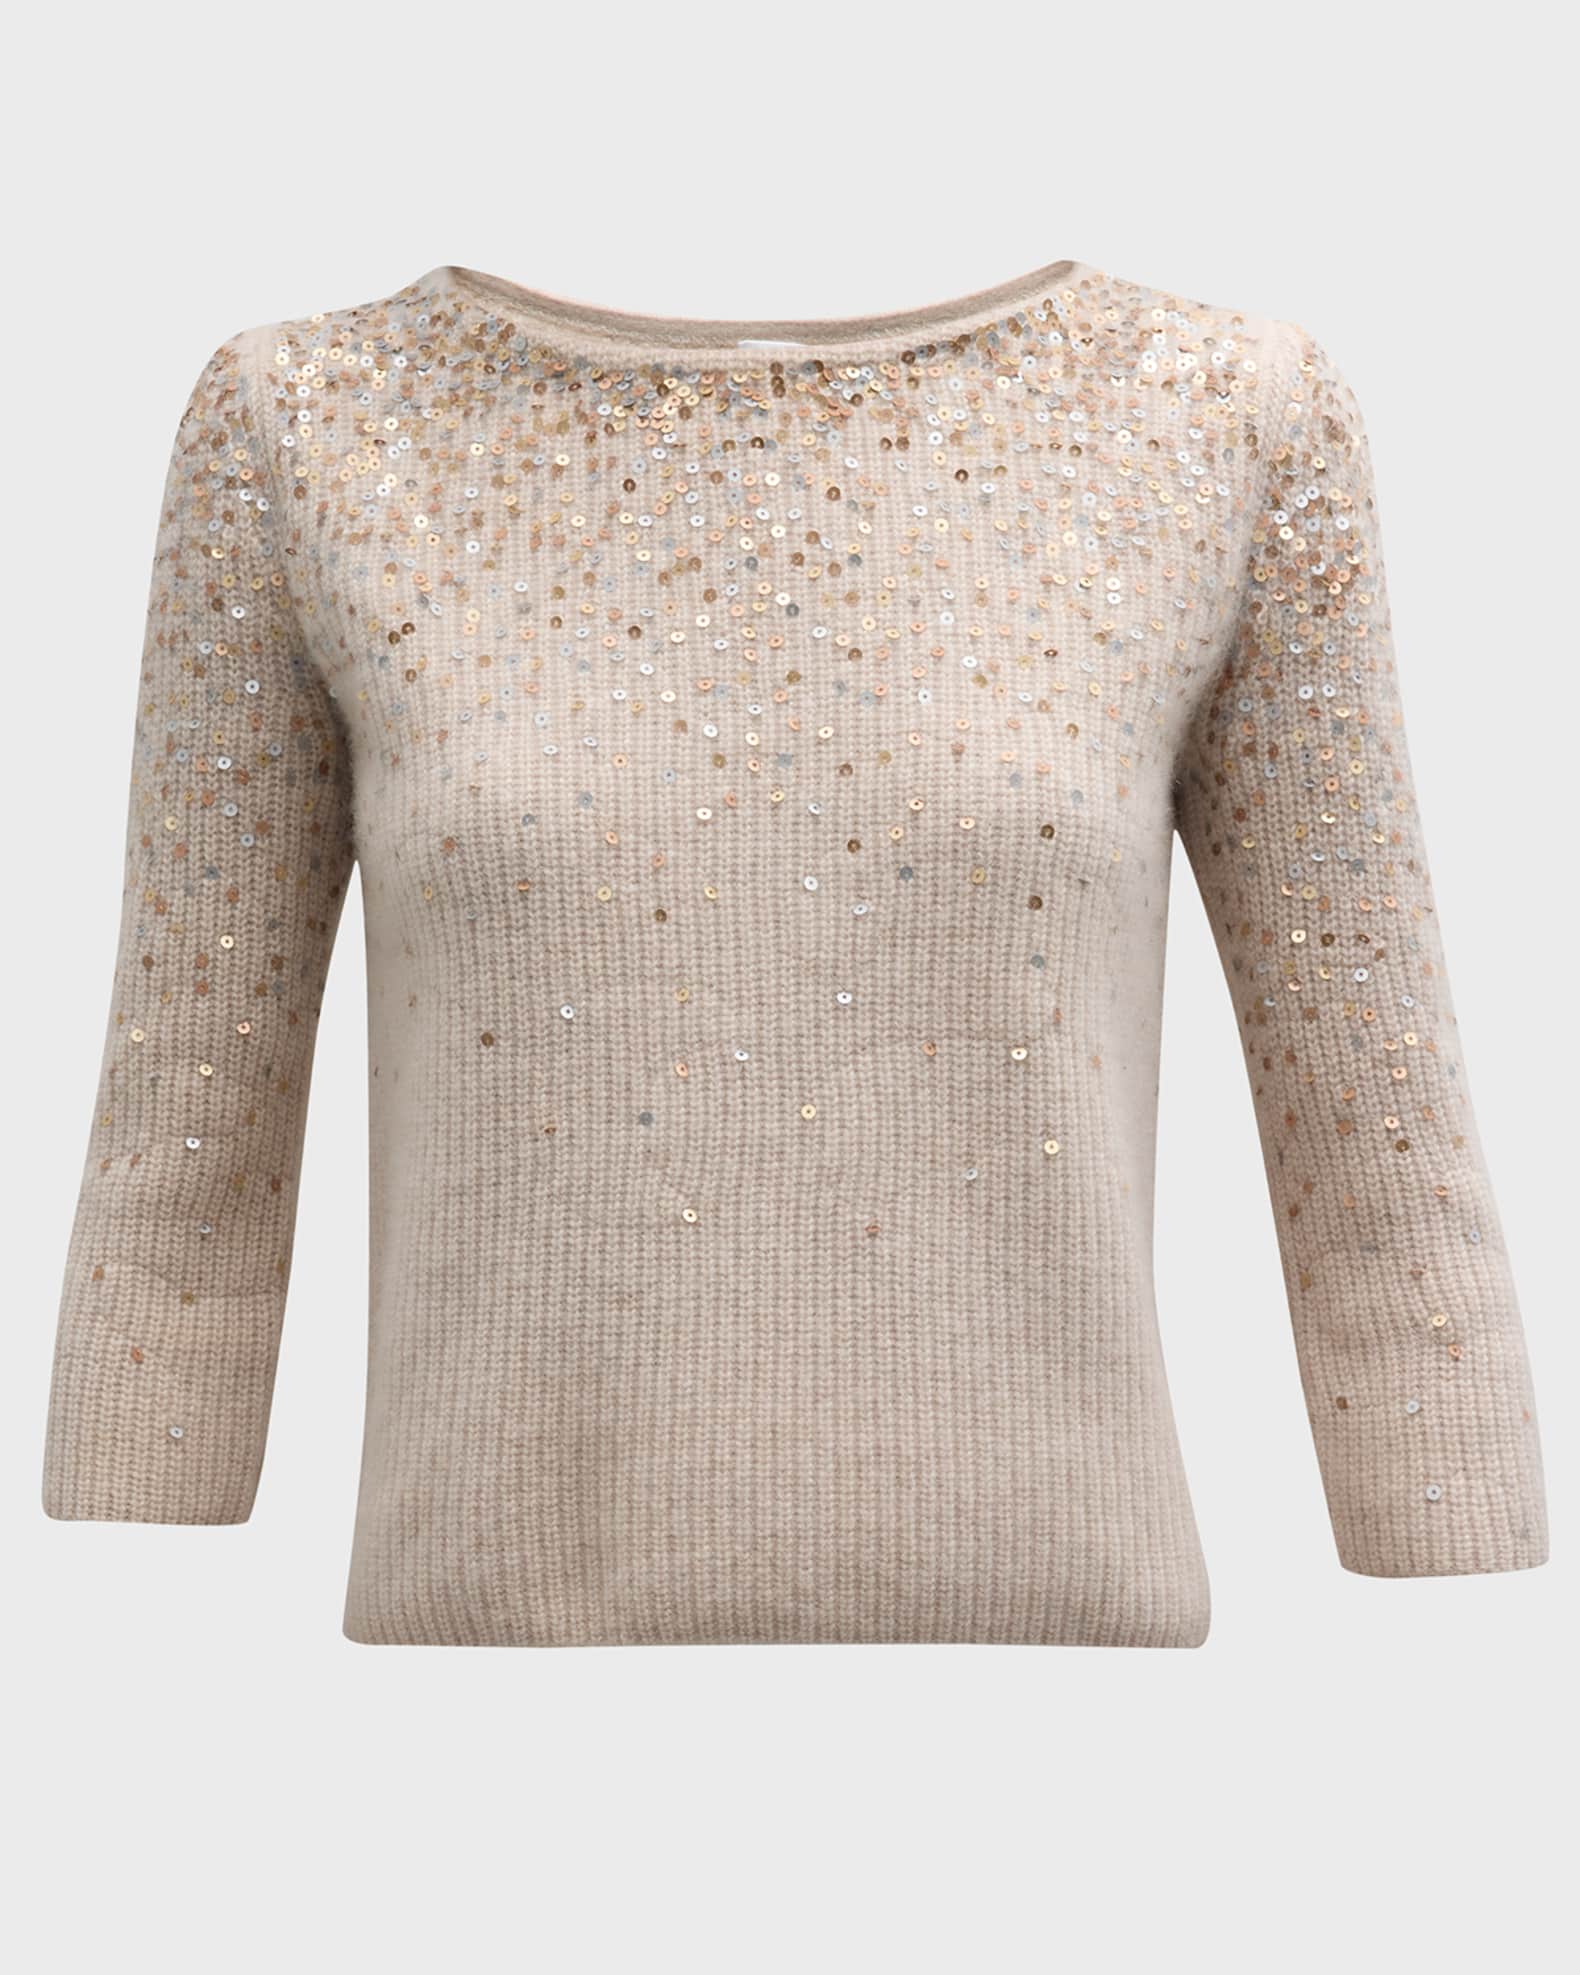 Neiman Marcus Cashmere Collection Cashmere Sweater with Ombre Sequins | Neiman Marcus